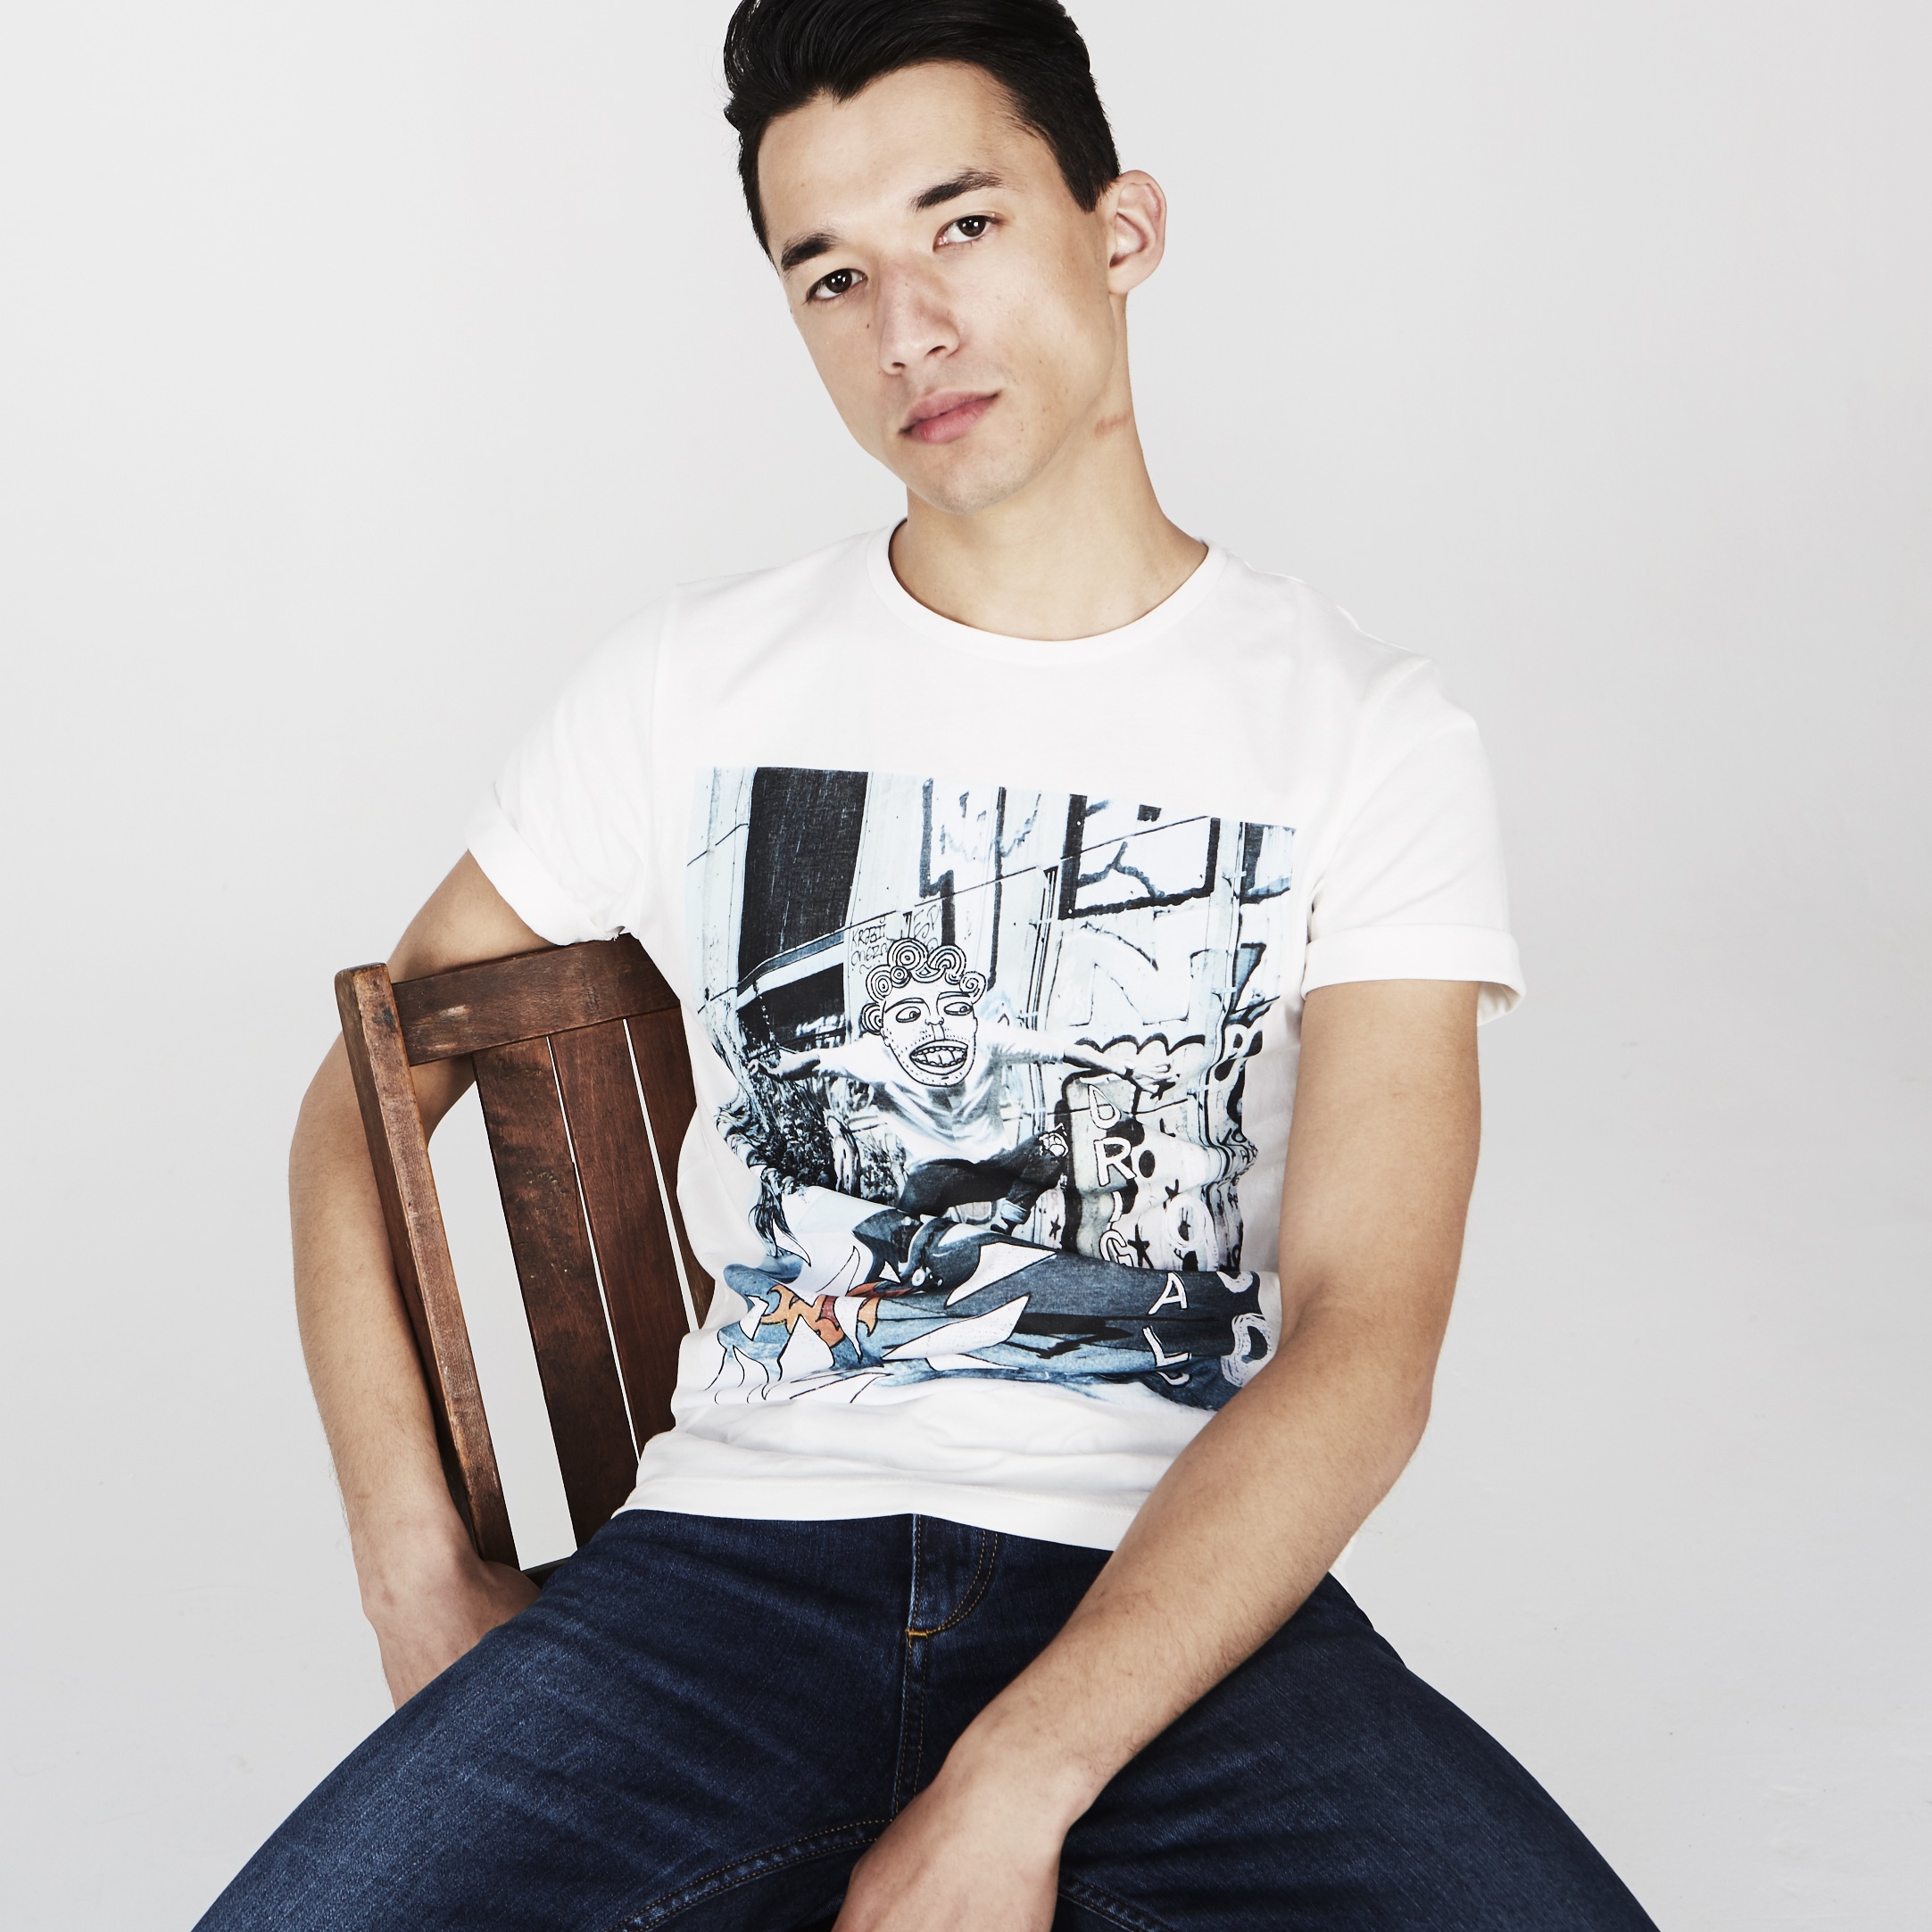 JACK AND JONES SS16: THE STATEMENT TEE